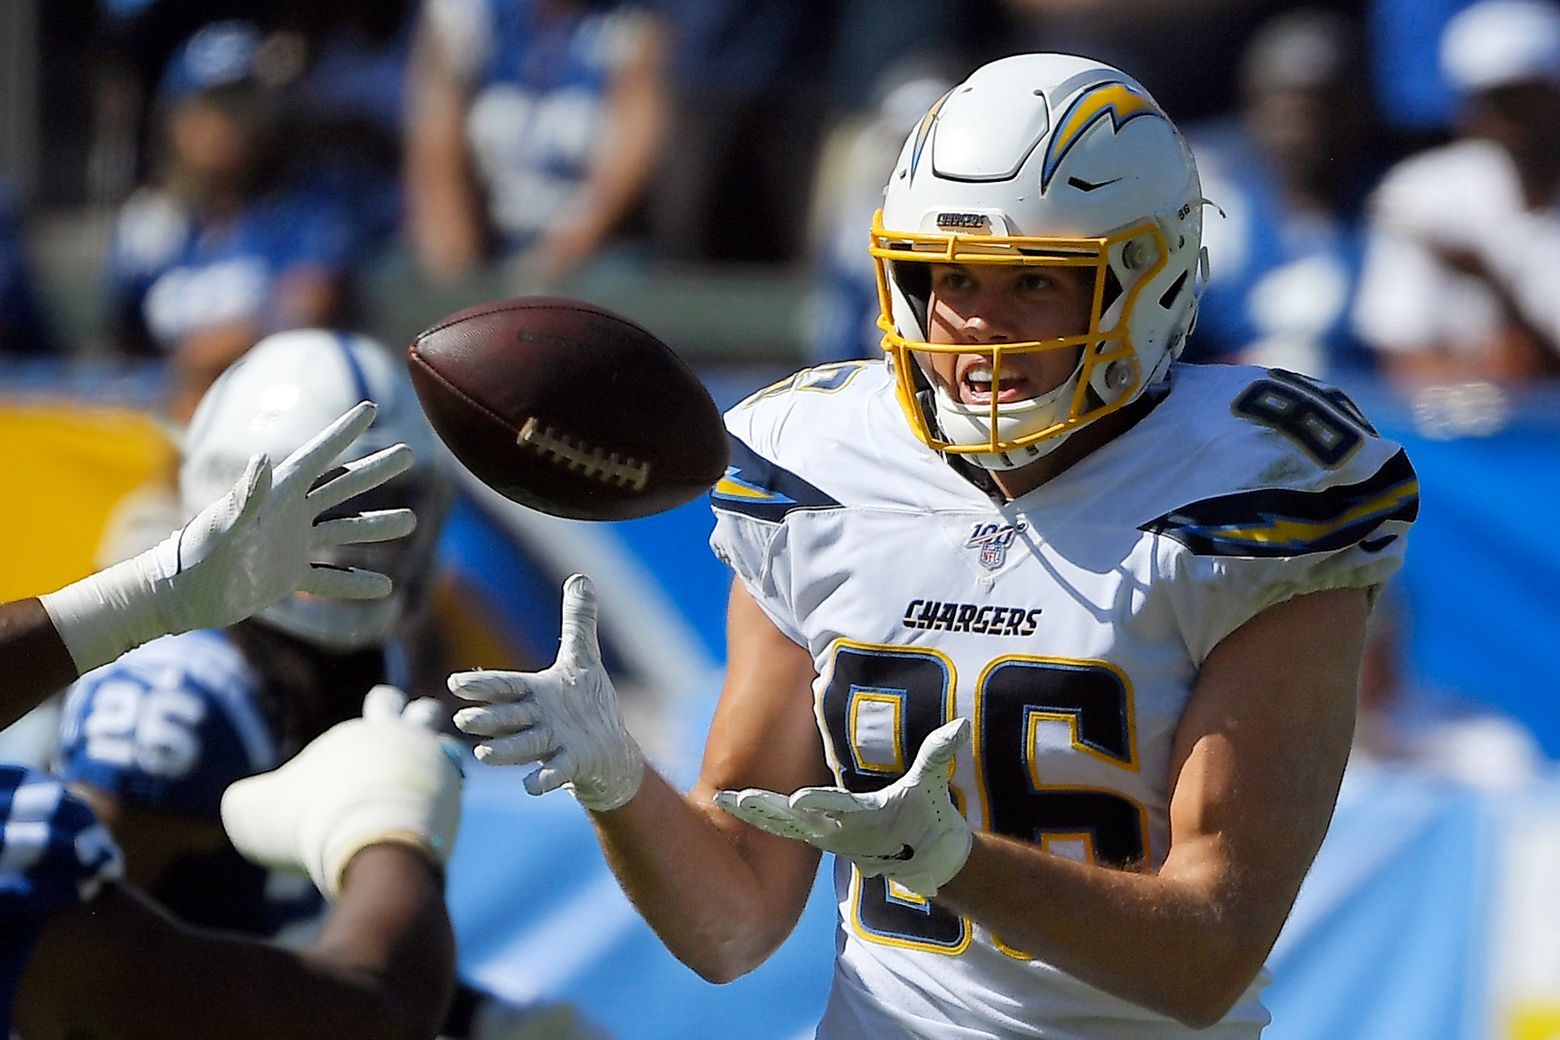 Chargers tight end Henry suffers knee injury in opener